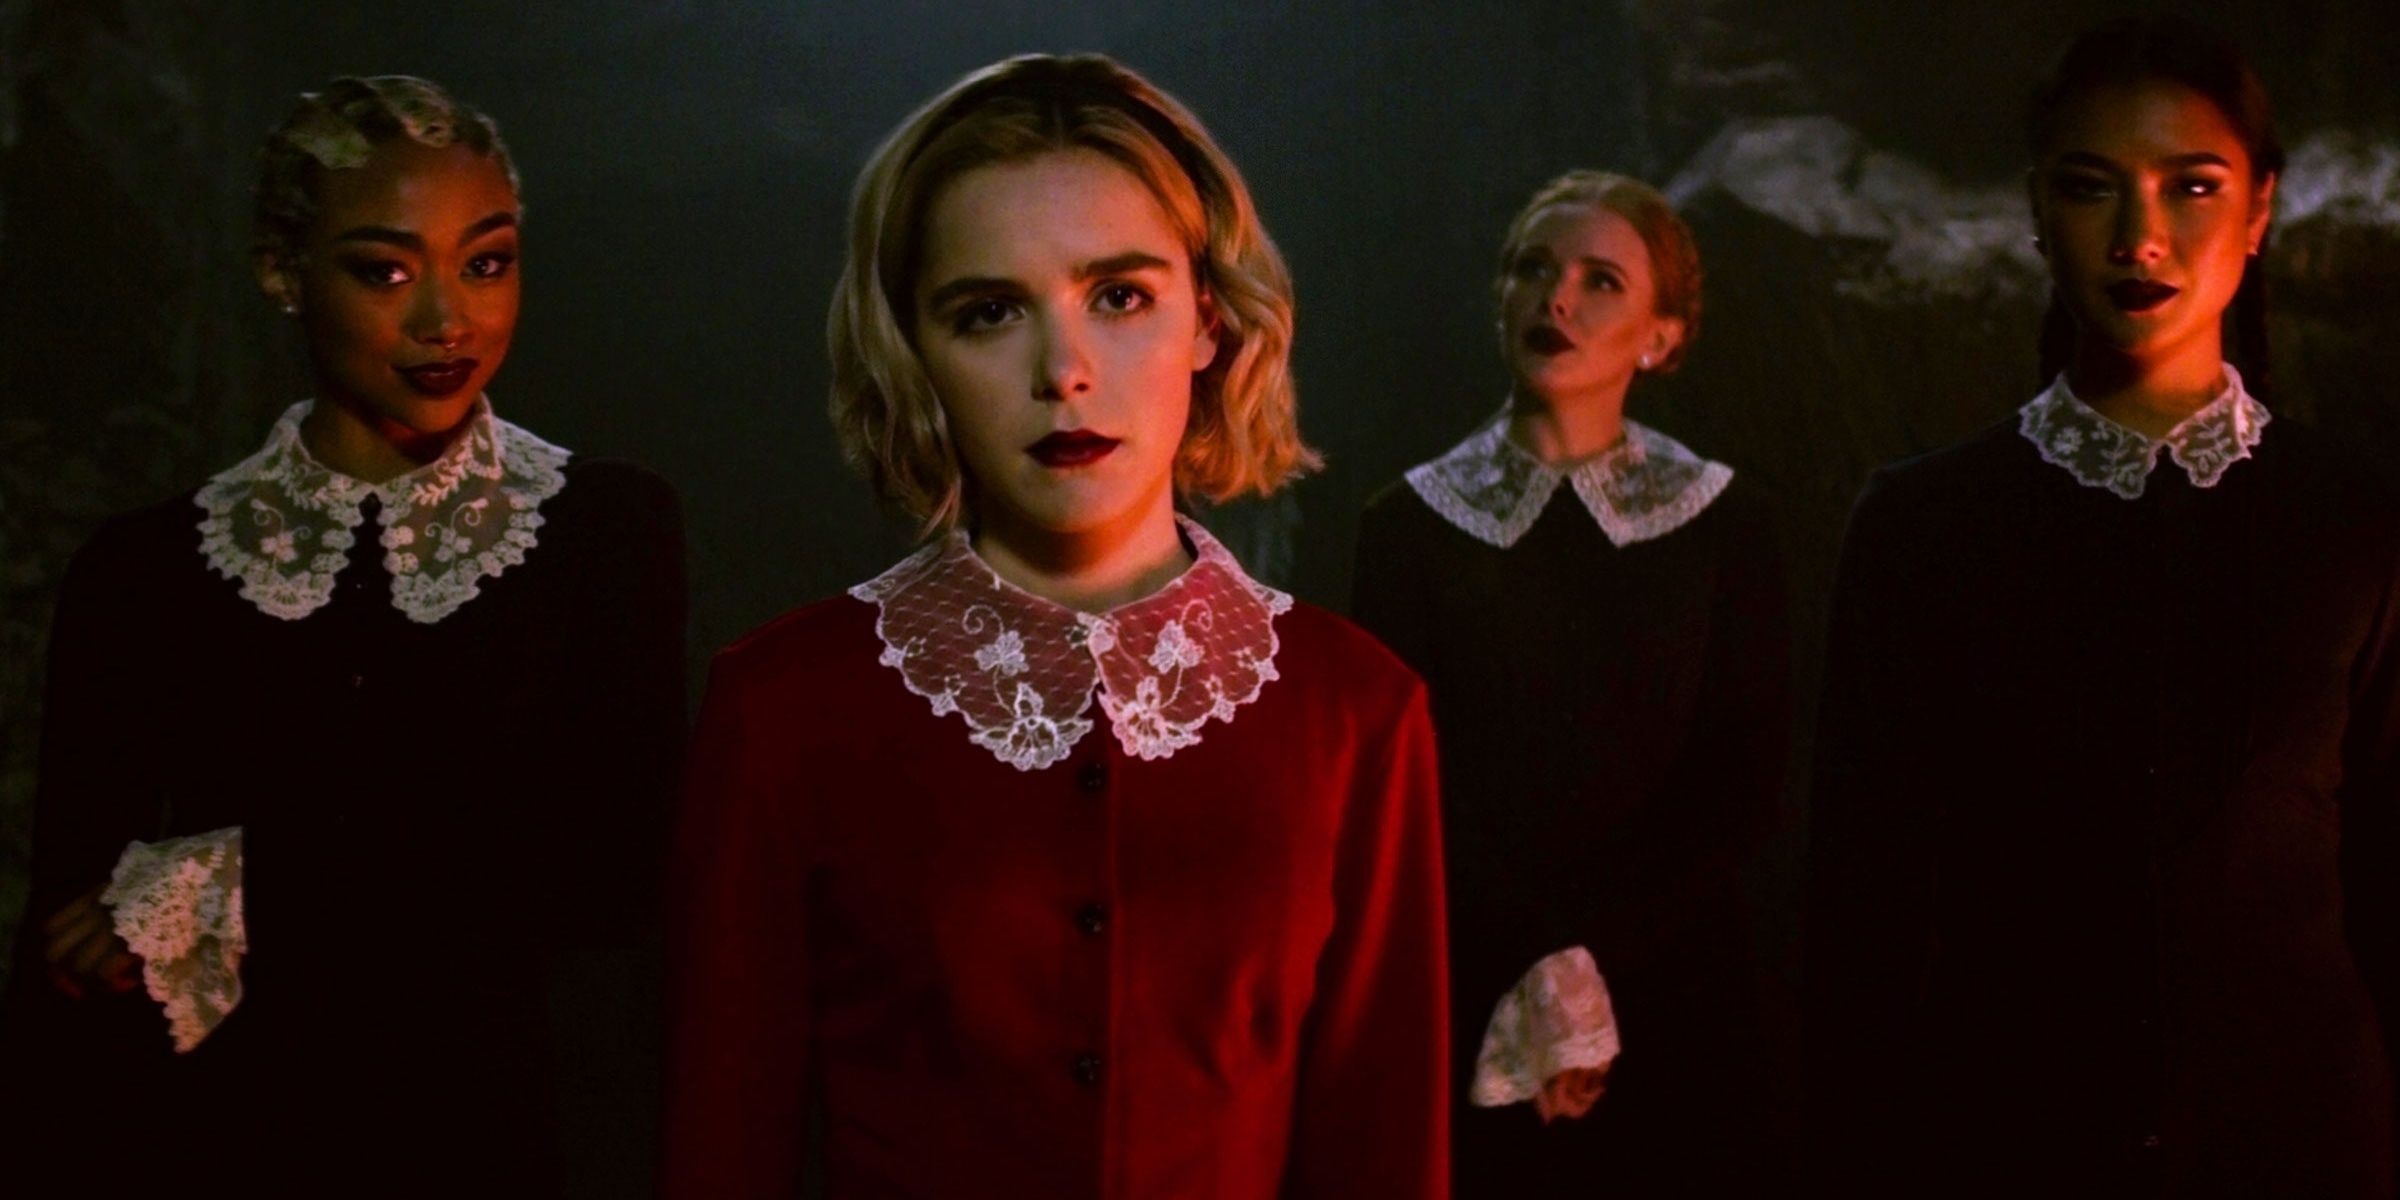 Sabrina stands with the Weird Sisters